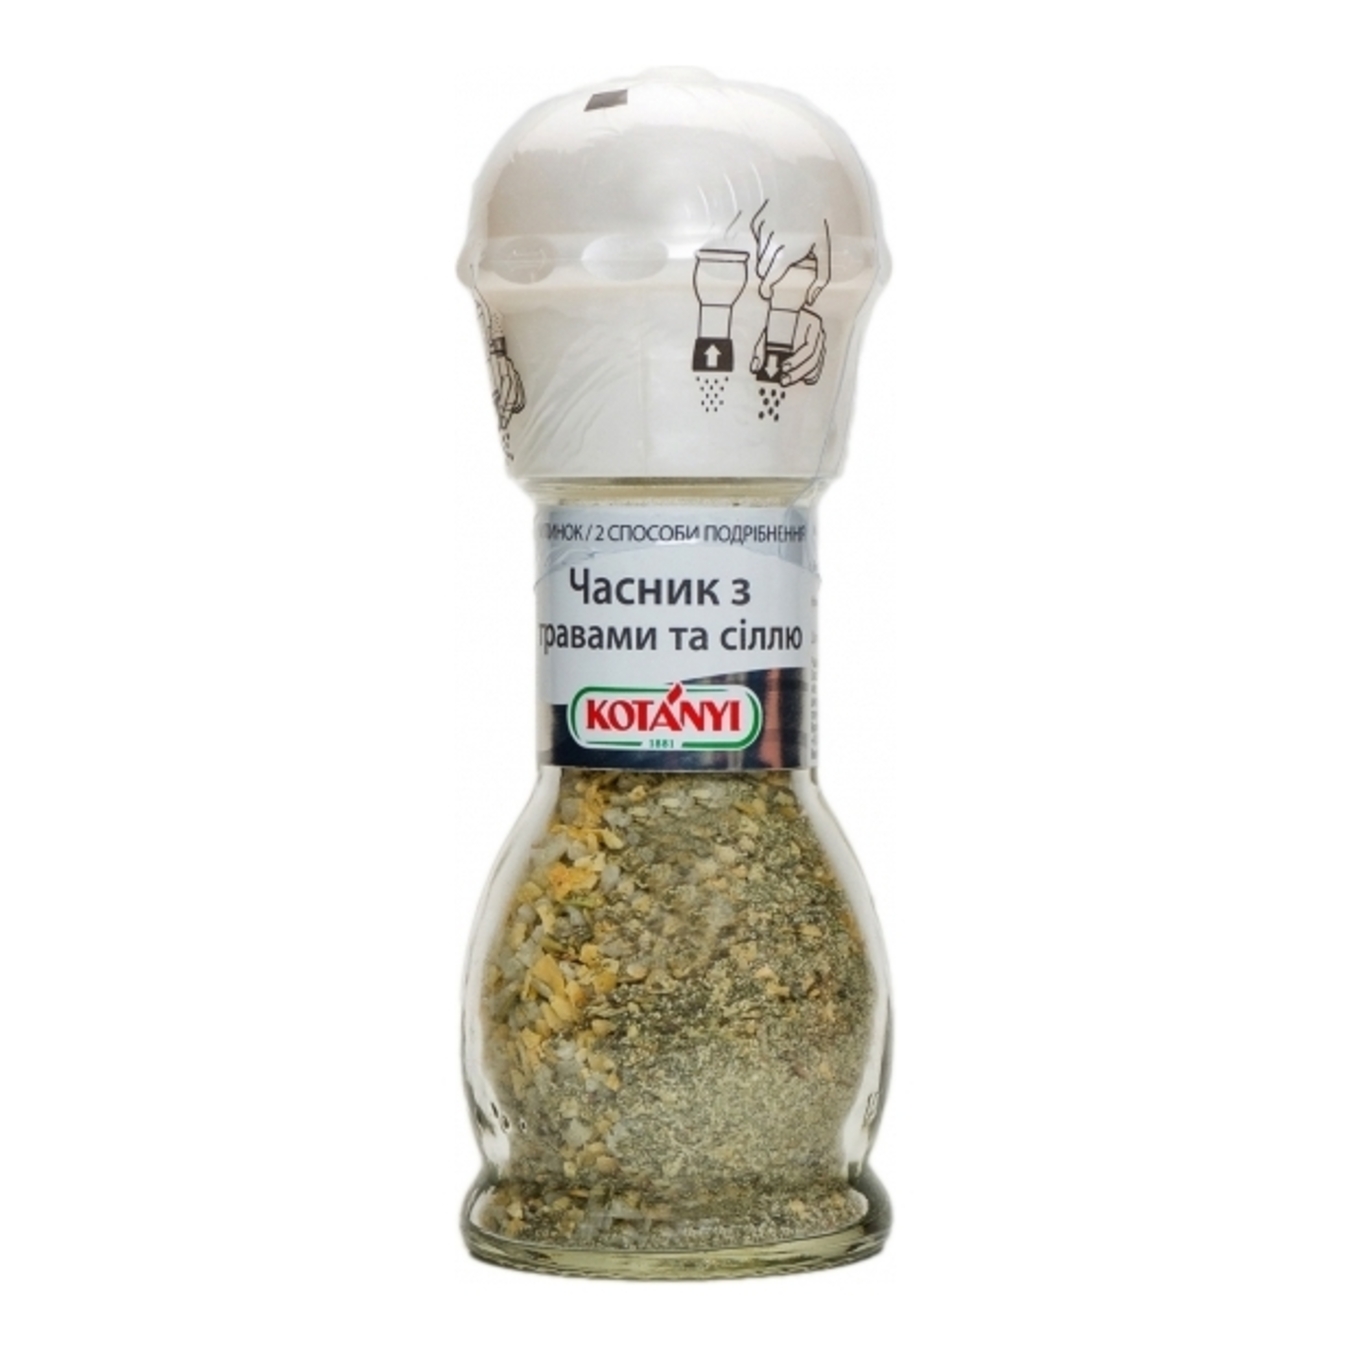 Kotanyi Garlic with Herbs Spices 50g